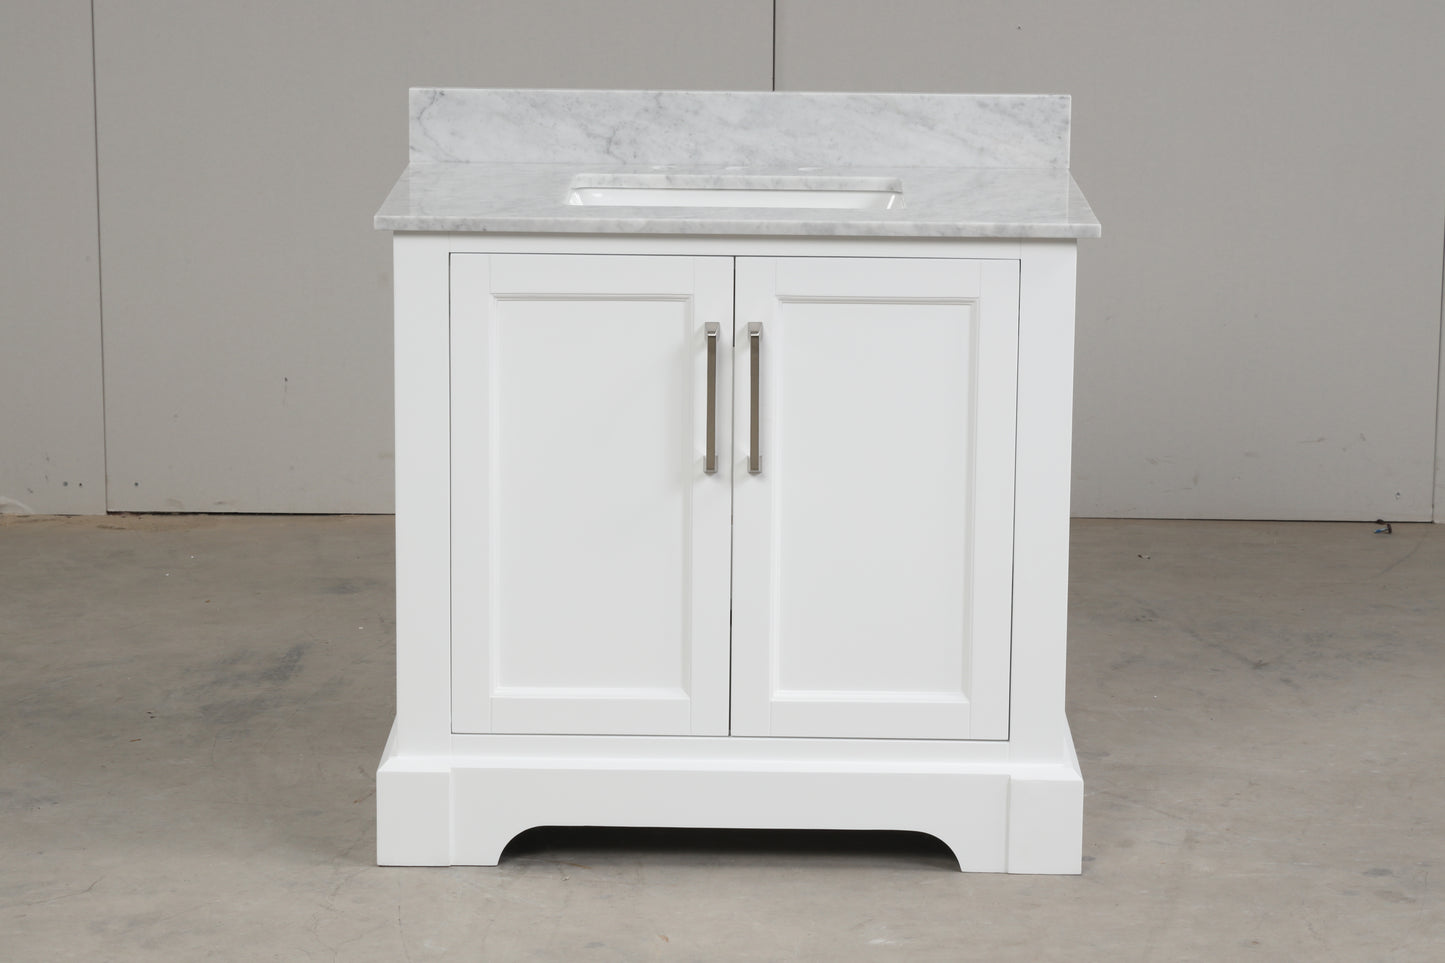 36 Inch Single Solid Wood Bathroom Vanity Set, with Drawers, Carrara White Marble Top, 3 Faucet Hole